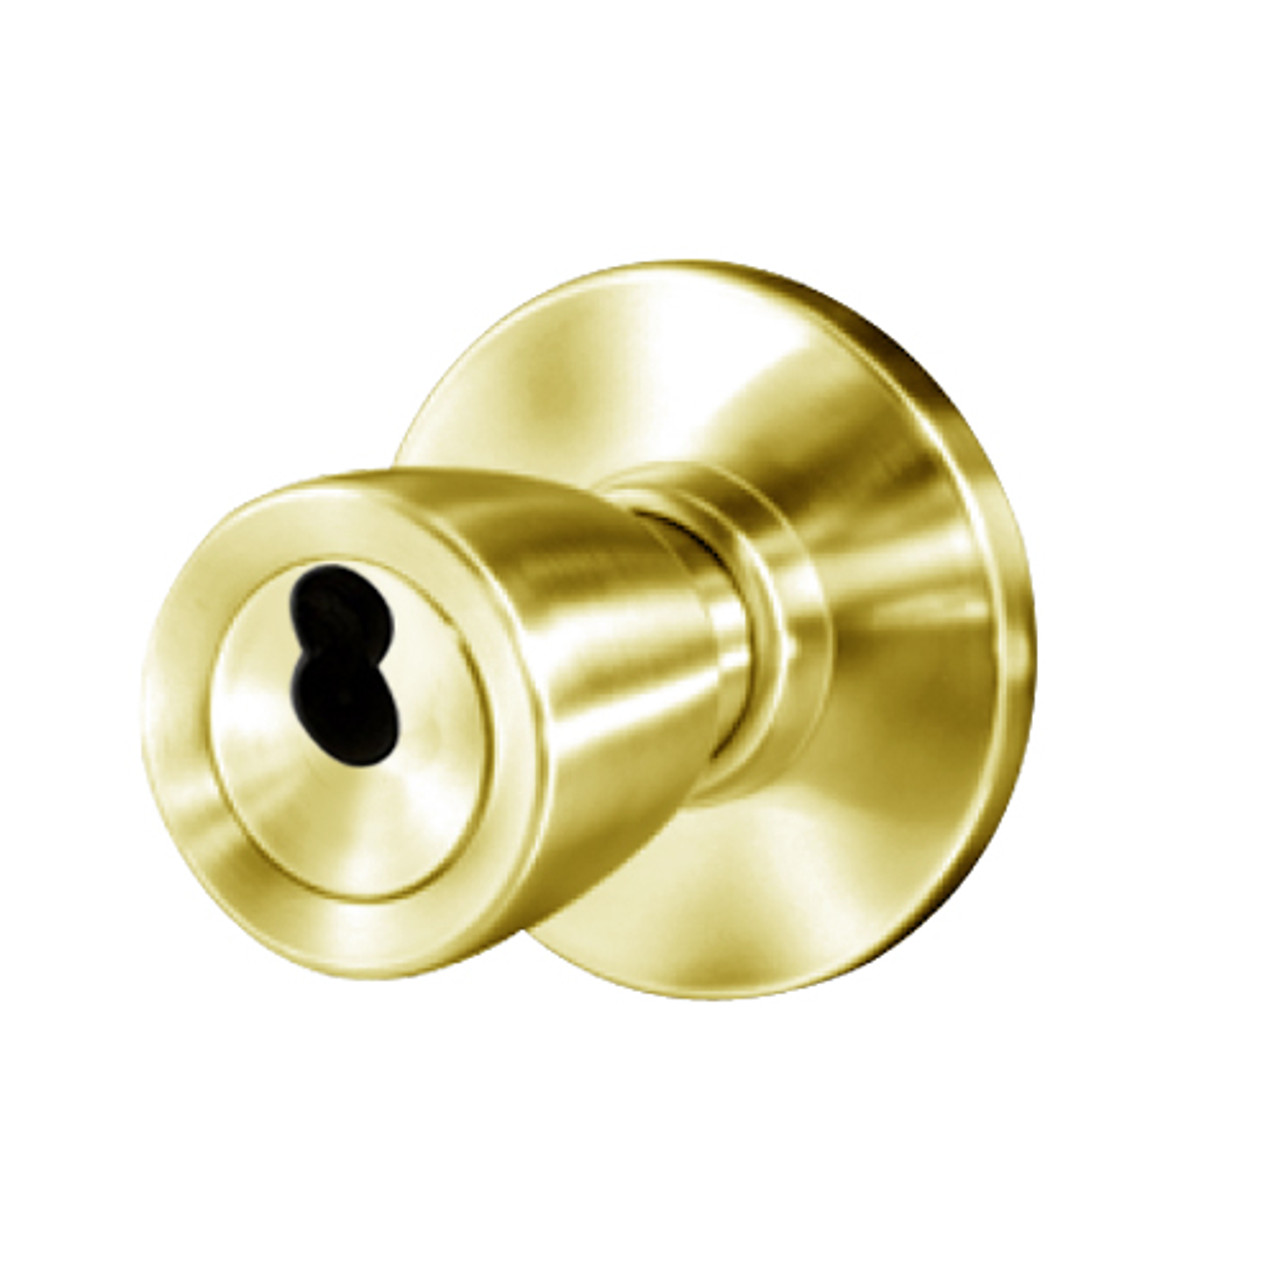 8K37AB6AS3605 Best 8K Series Entrance Heavy Duty Cylindrical Knob Locks with Tulip Style in Bright Brass